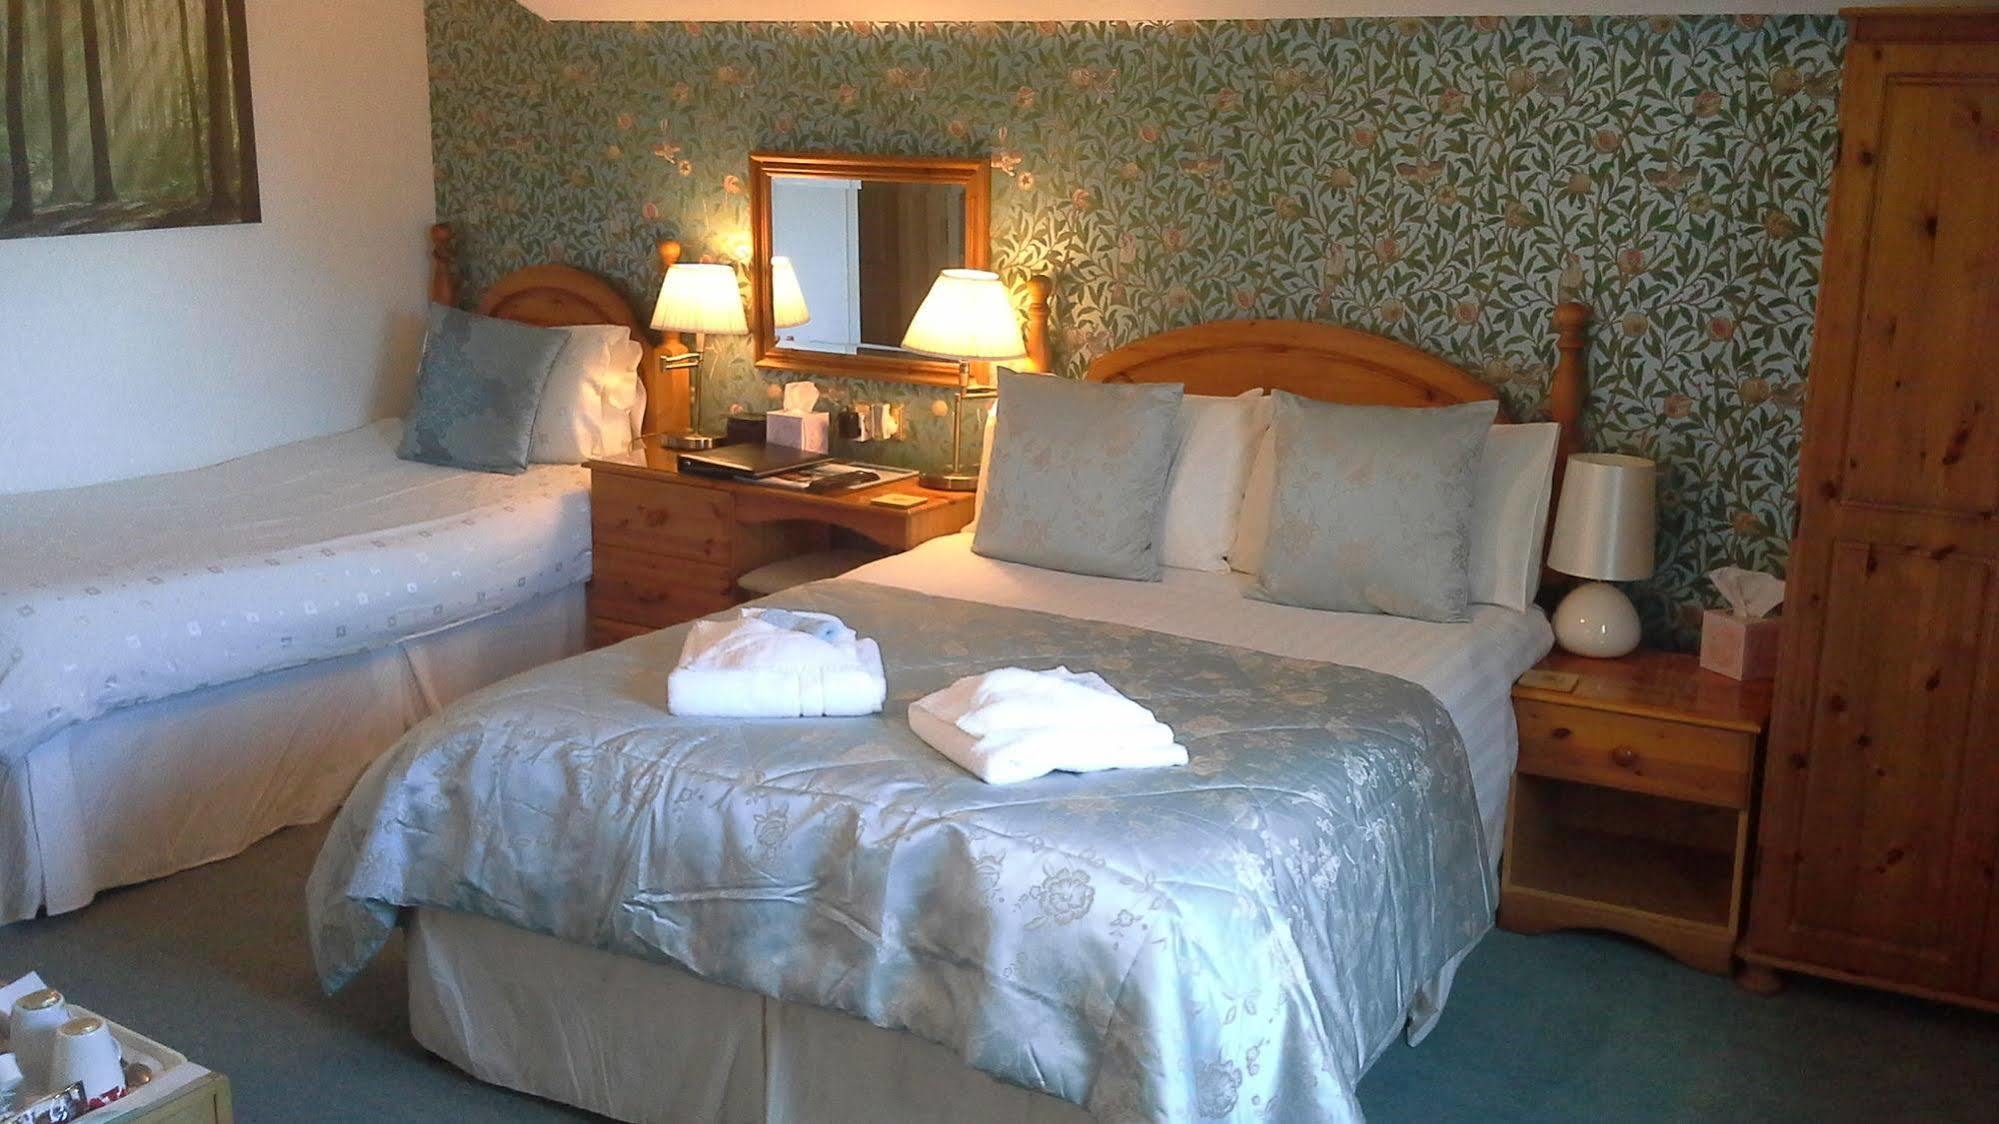 Castlecroft Bed And Breakfast Stirling Luaran gambar